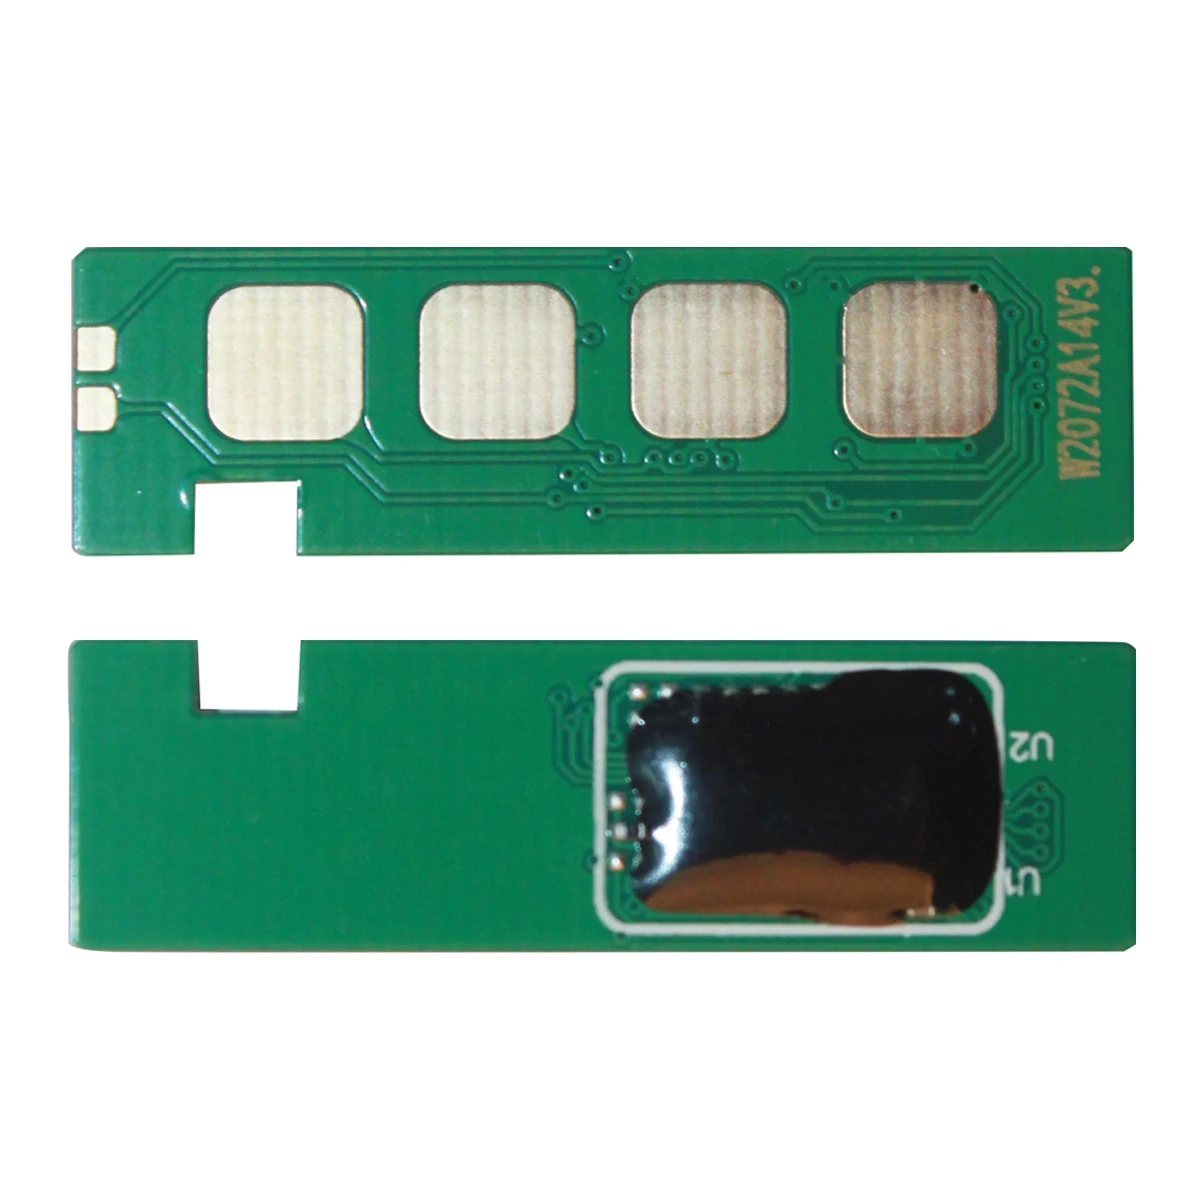 

W2060A W2070A W2071A W2072A W2073A W2090A Toner Cartridge Chip for HP Color Laser 150 150a 150w 150nw MFP 178 178nw 179 179fnw